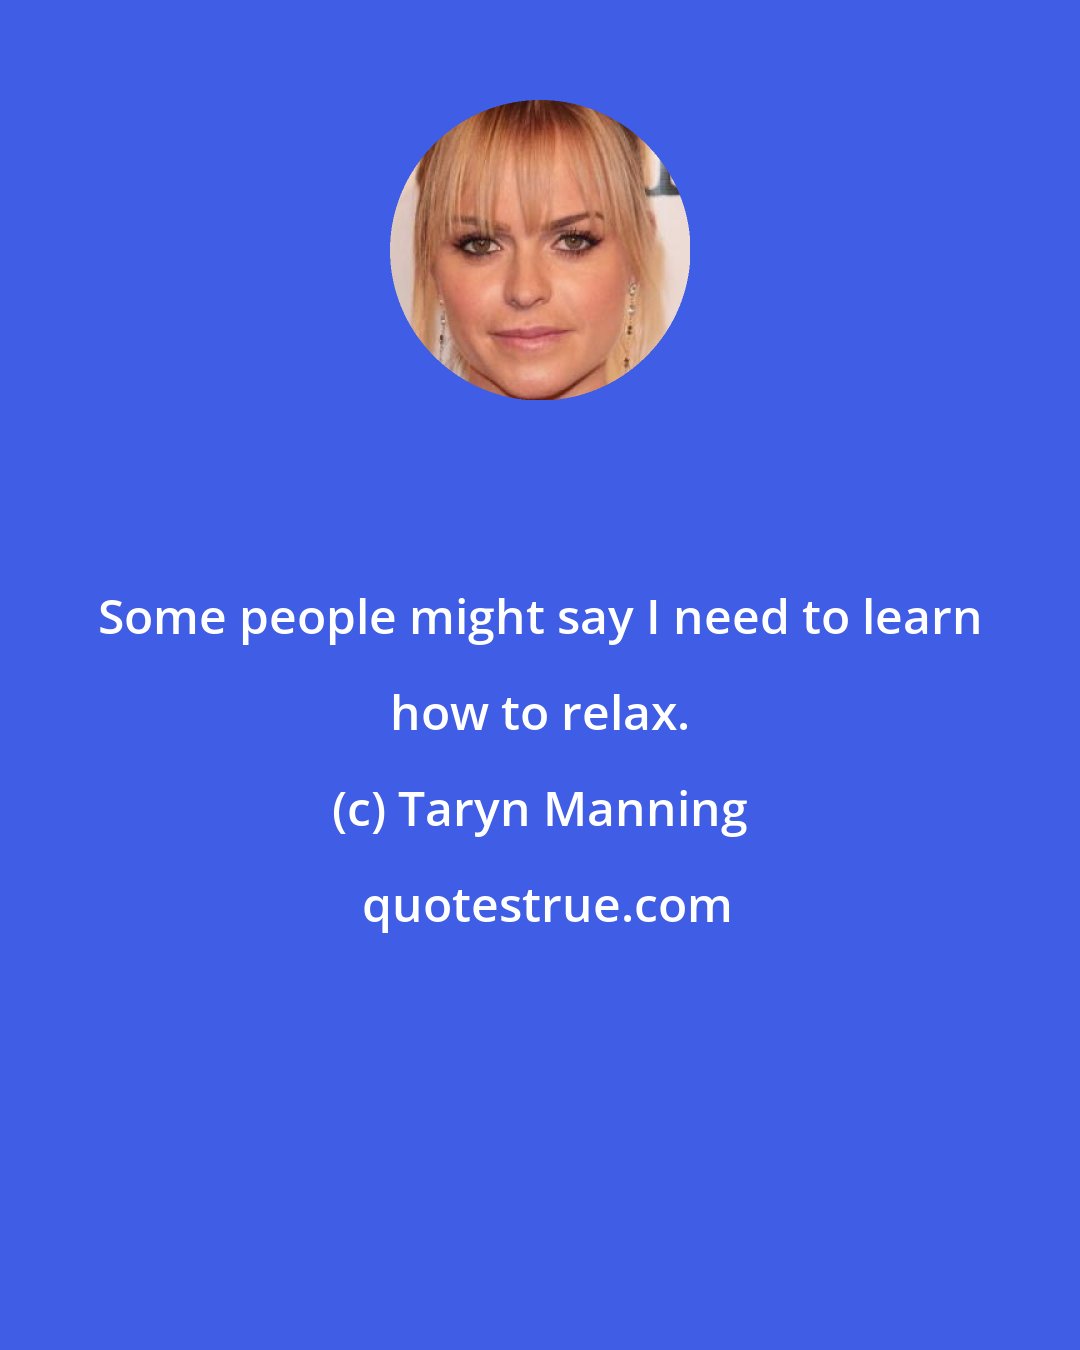 Taryn Manning: Some people might say I need to learn how to relax.